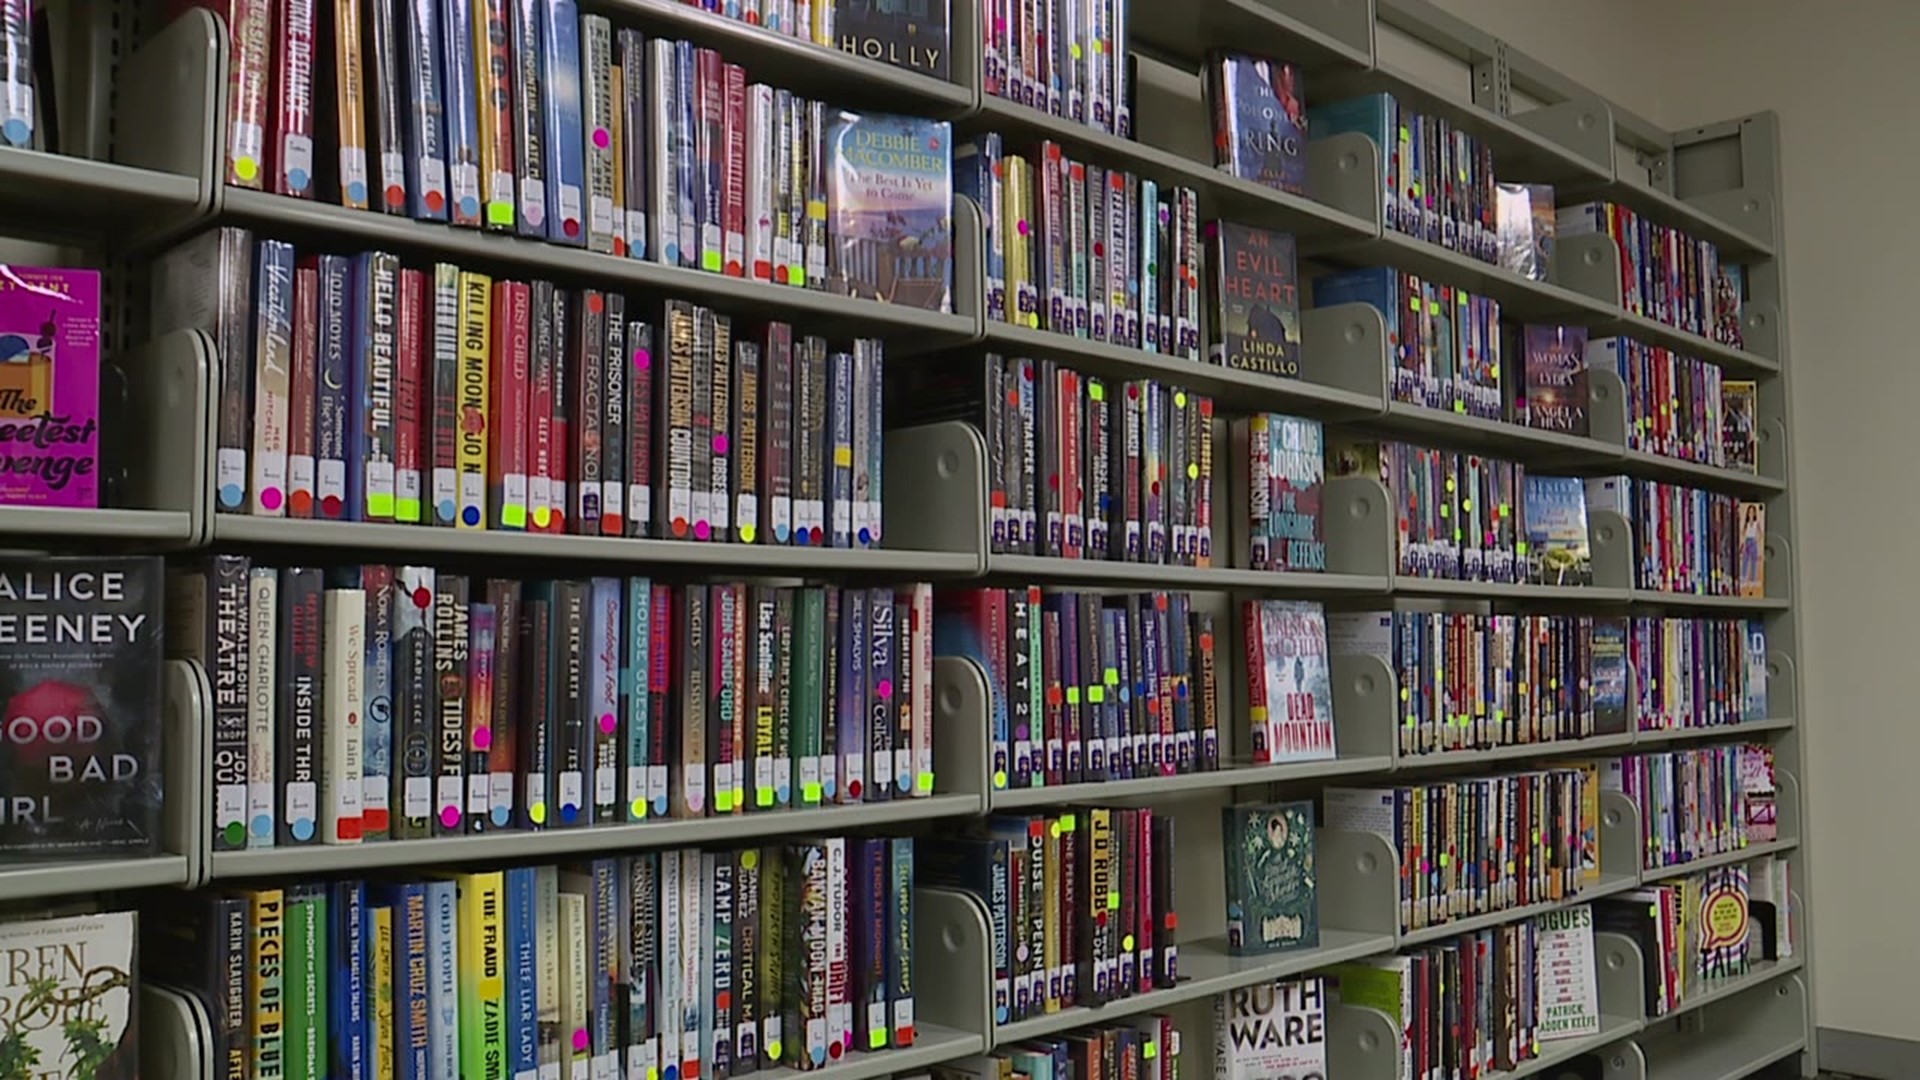 For the past few weeks, the future of Bradford County Library has been a hot topic.